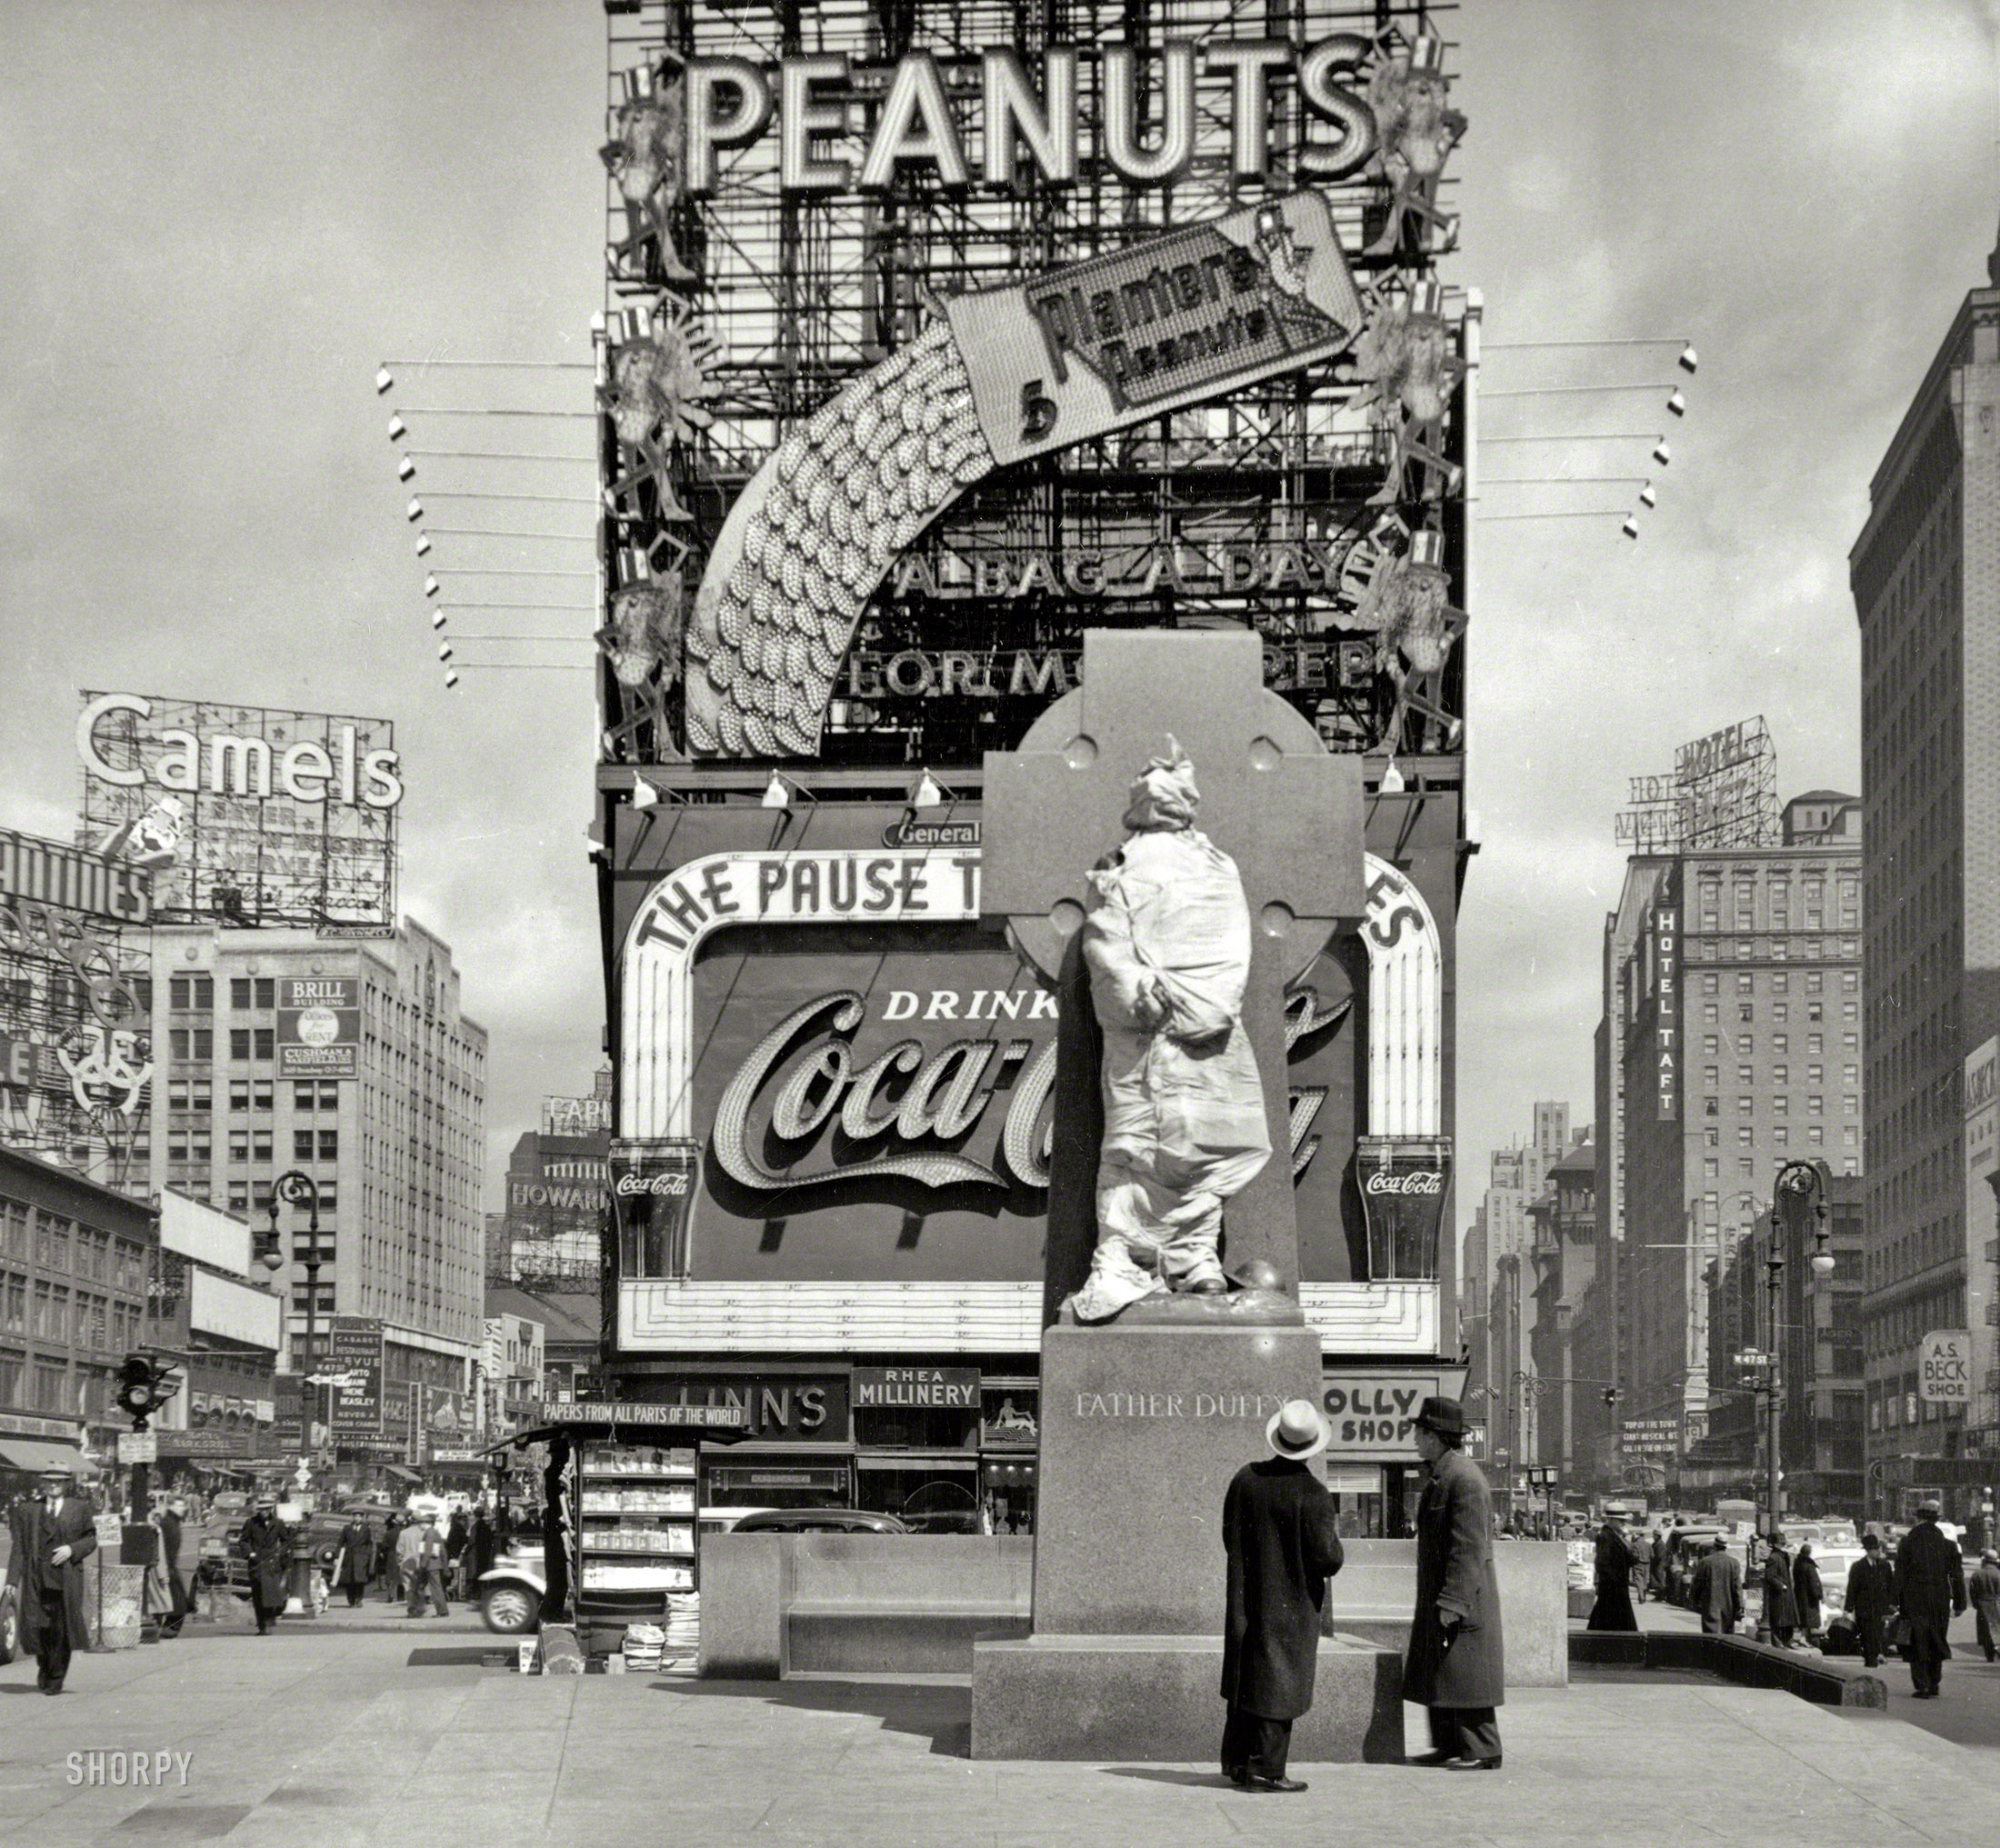 New York, 1937. "Times Square with Father Duffy statue still wrapped up." Sculptor Charles Keck's likeness of Francis P. Duffy, the New York Army National Guard chaplain decorated for his service in France with the 69th Infantry Regiment during World War I. Duffy Square and the statue were dedicated on May 2, 1937, by Mayor LaGuardia. Photo by Peter Sekaer. View full size.